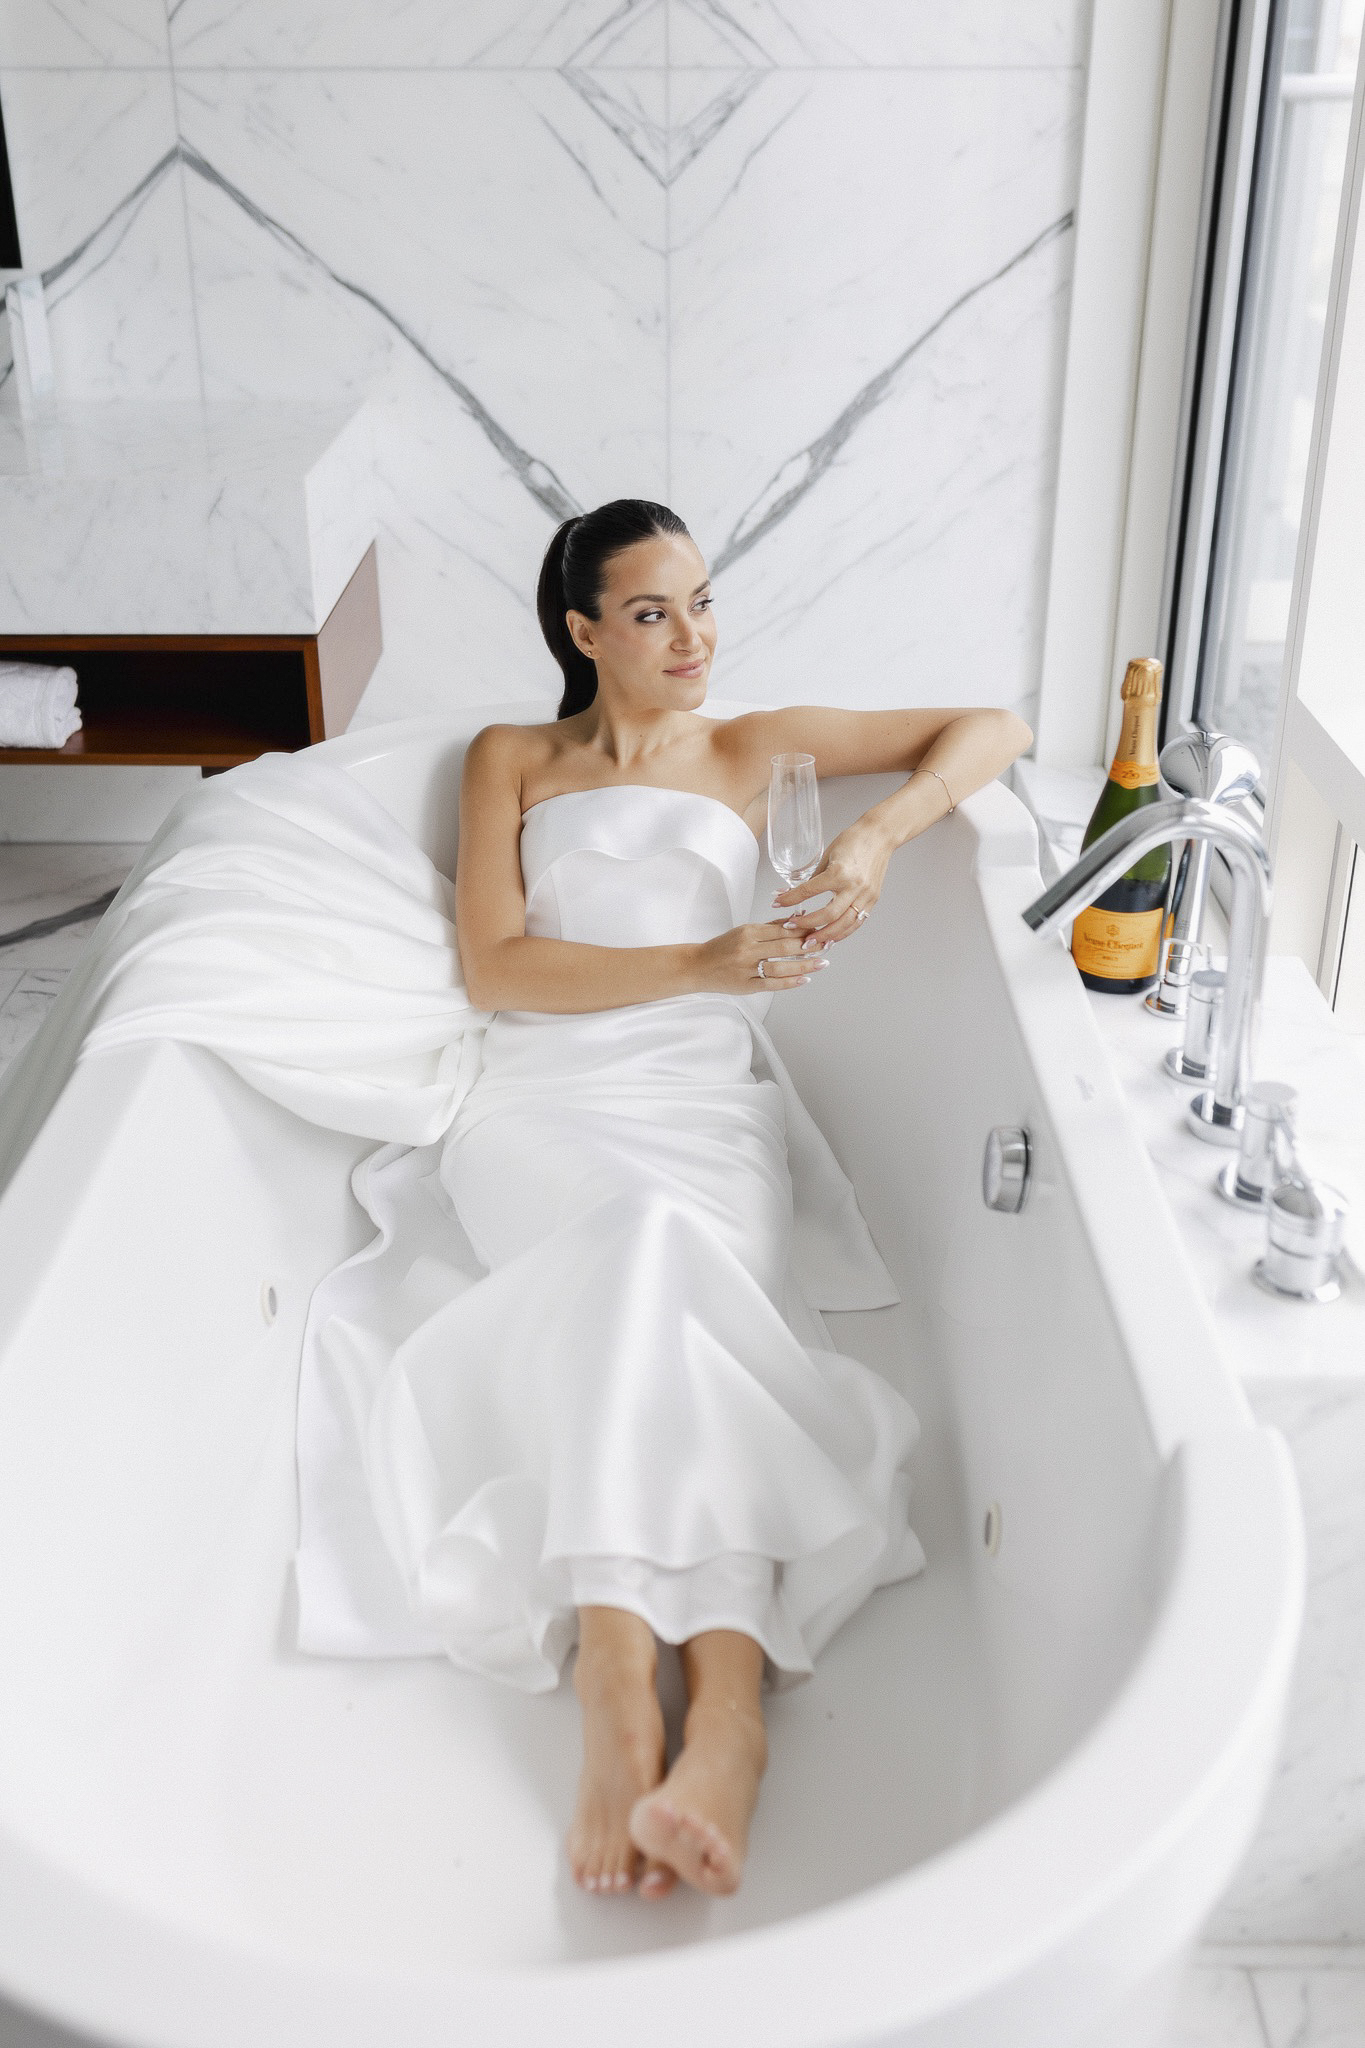 The bride in a wedding dress holding a champagne glass in a white bathtub